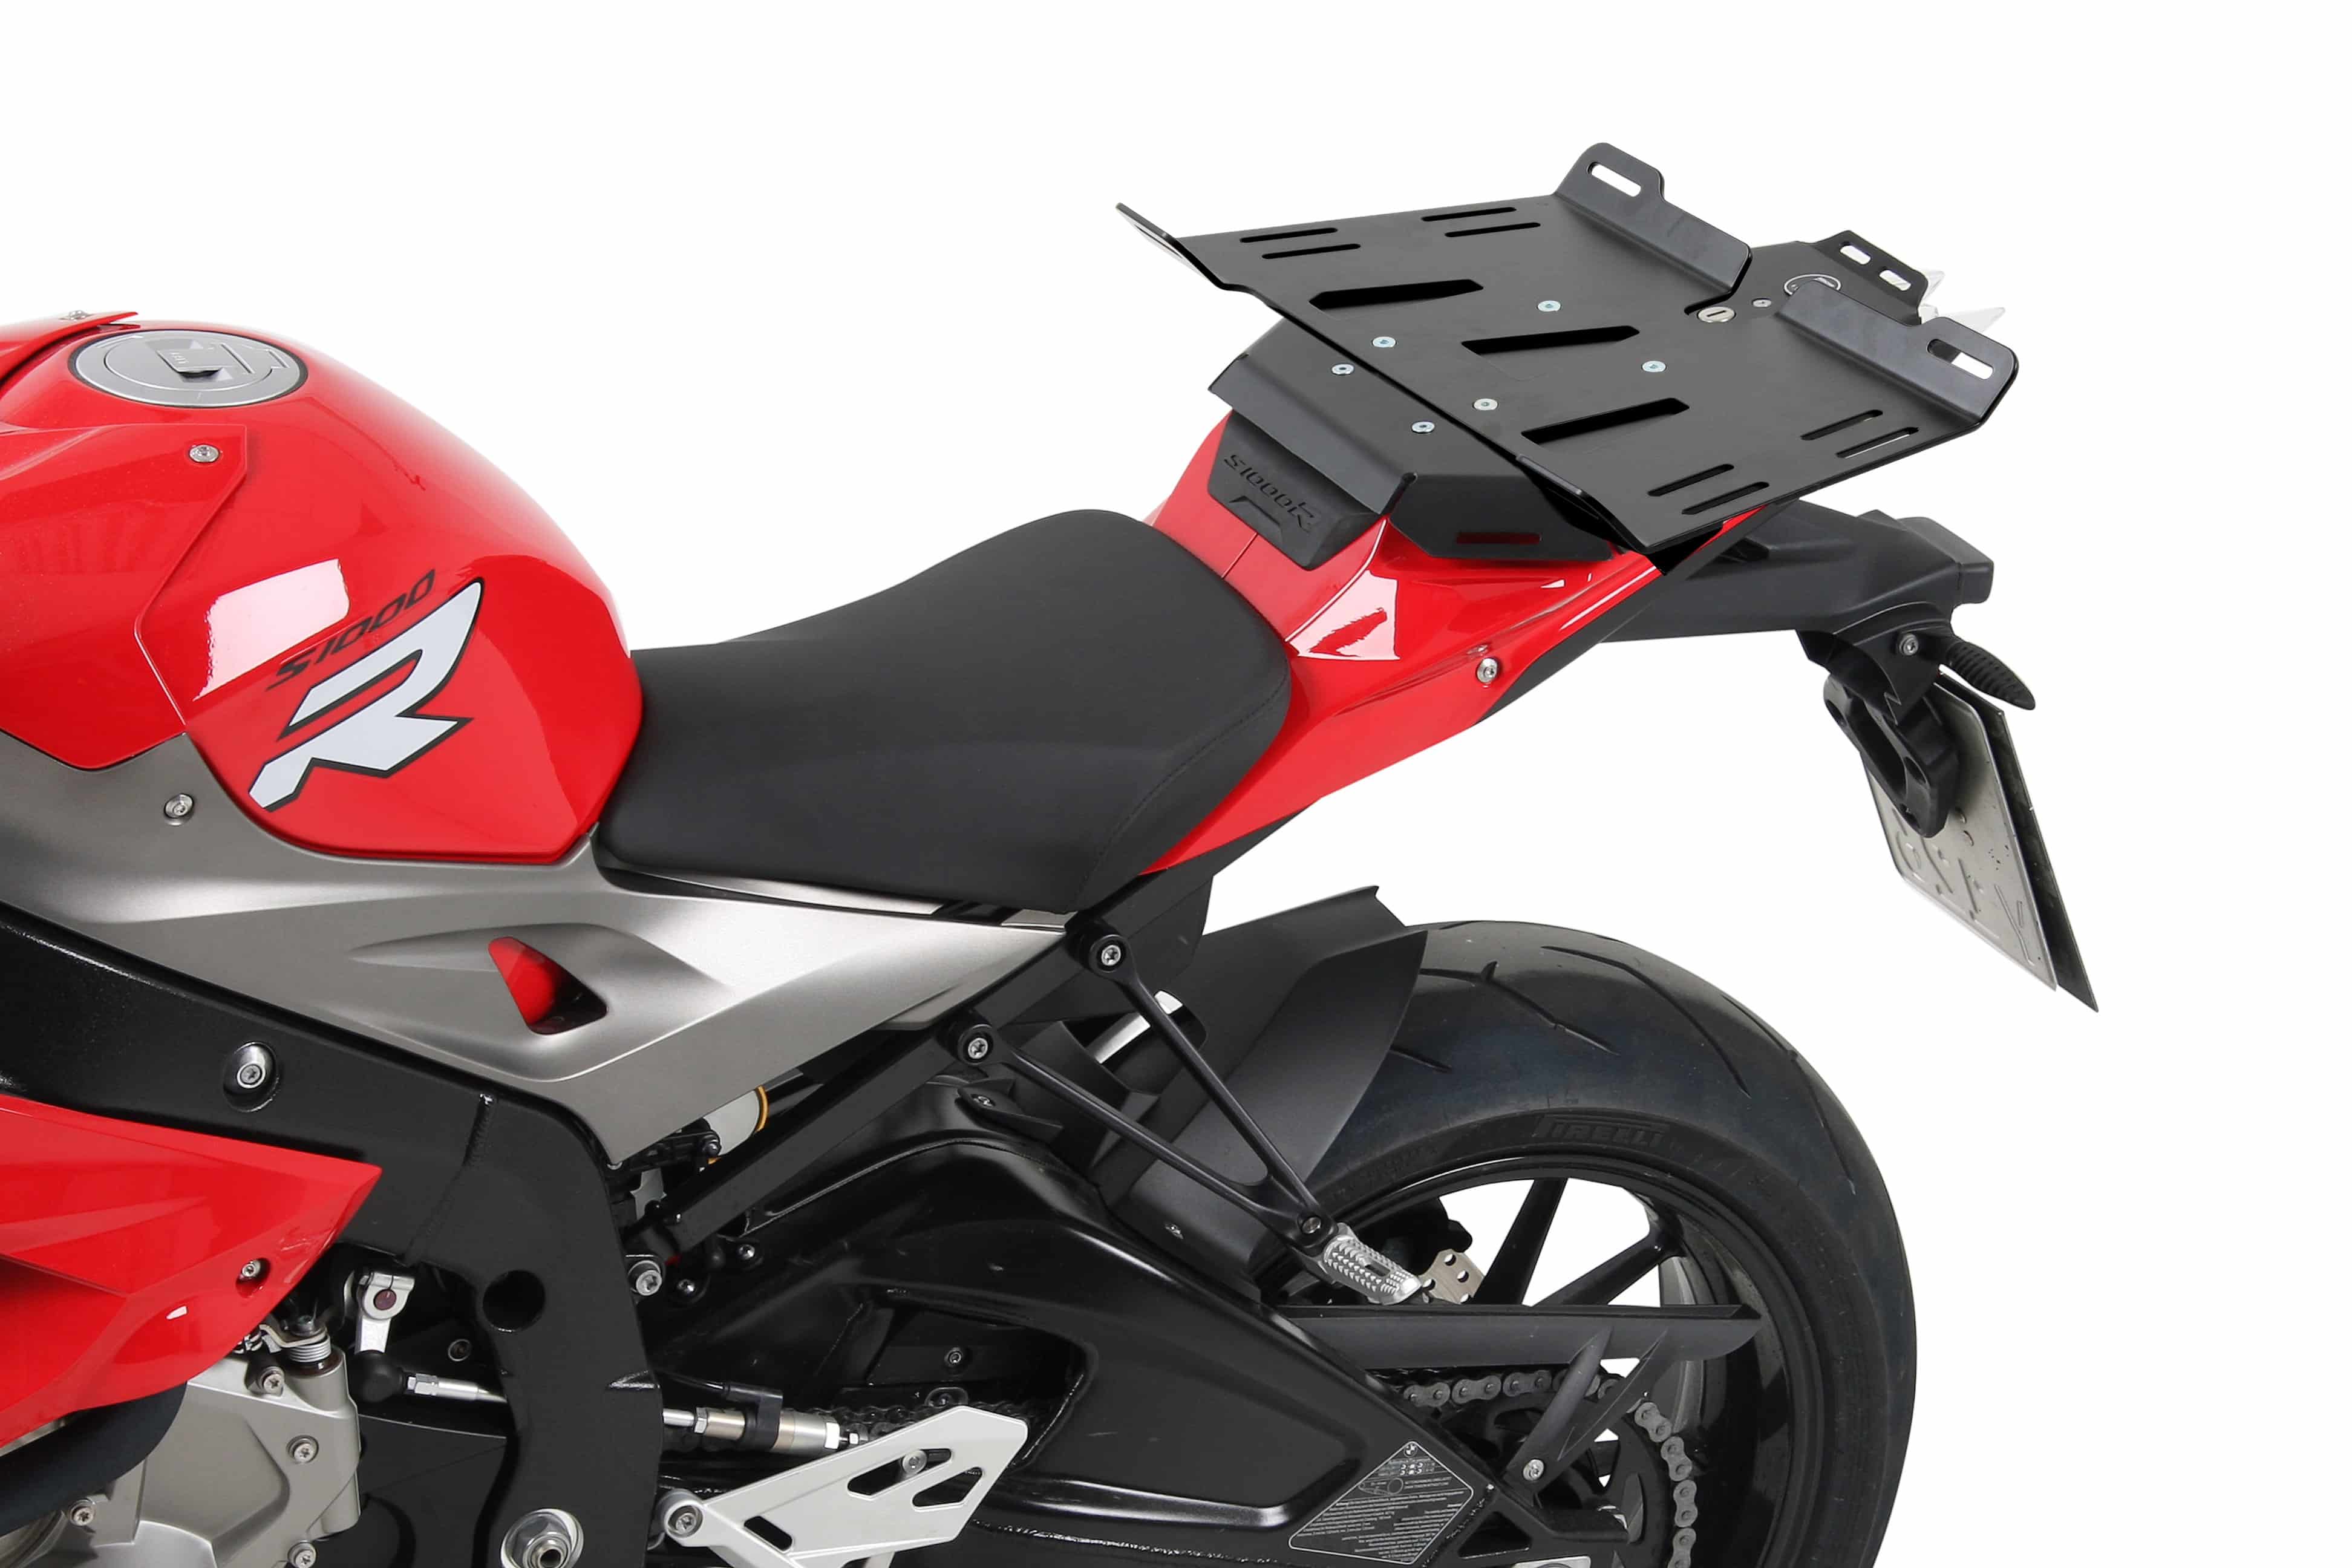 Modelspecific rear enlargement only in combination with Sportrack for BMW S 1000 RR (2009-2011)